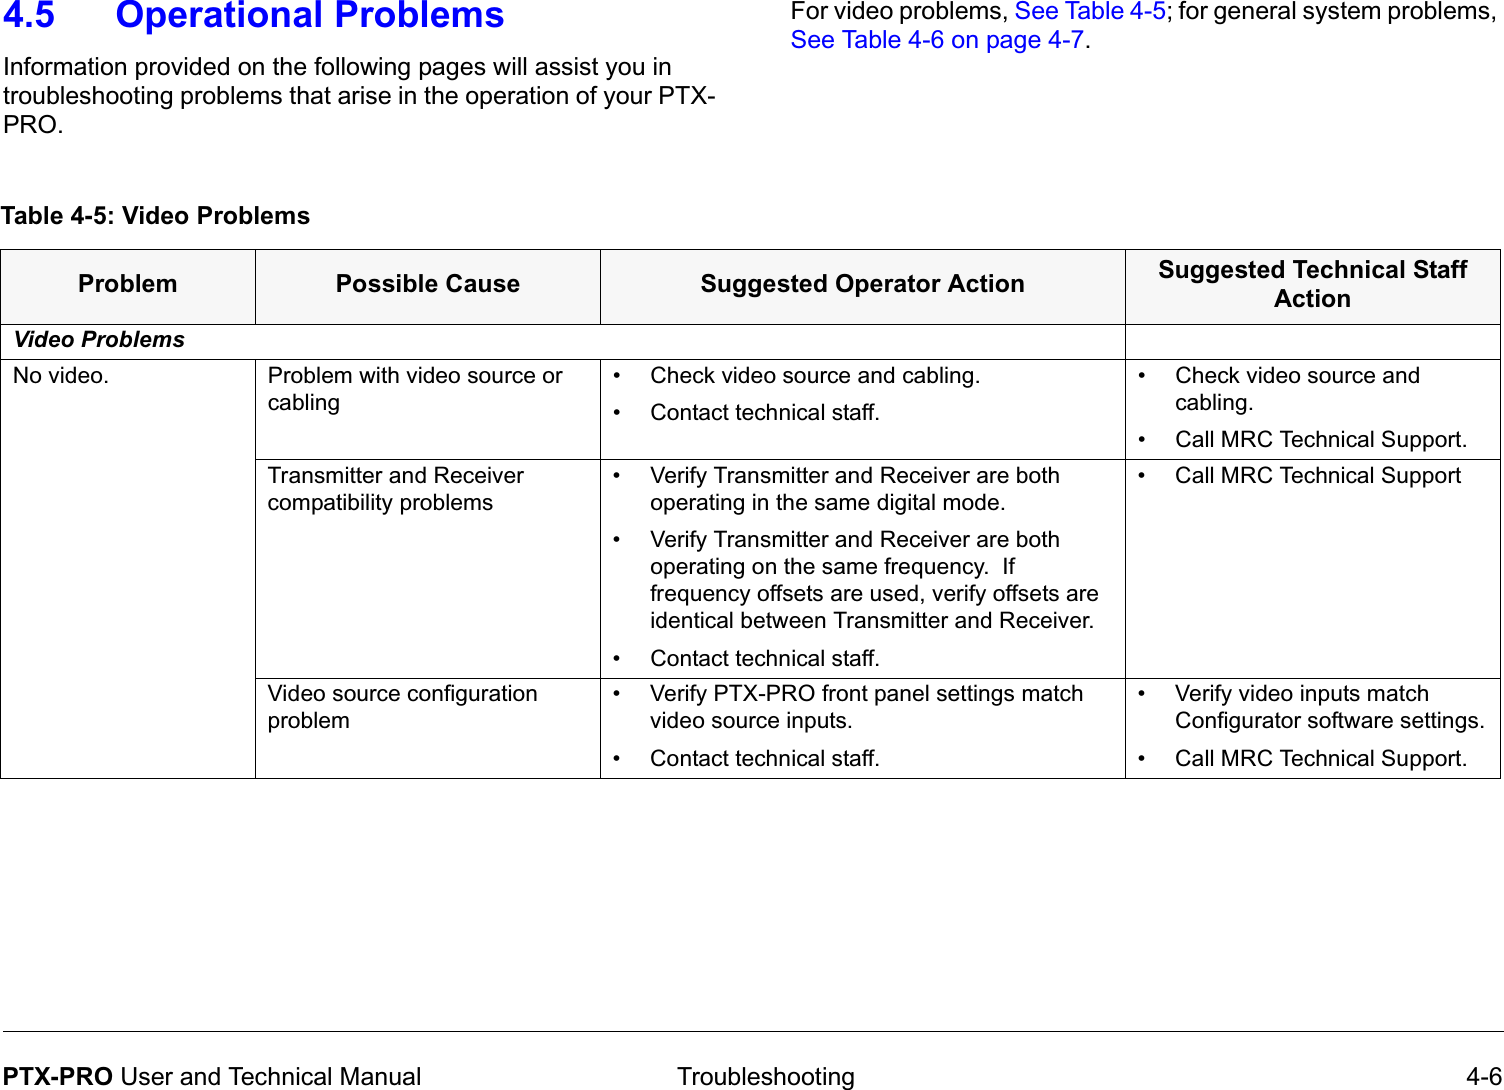  Troubleshooting 4-6PTX-PRO User and Technical Manual4.5 Operational ProblemsInformation provided on the following pages will assist you in troubleshooting problems that arise in the operation of your PTX-PRO.Table 4-5: Video ProblemsProblem Possible Cause Suggested Operator Action Suggested Technical Staff ActionVideo ProblemsNo video. Problem with video source or cabling• Check video source and cabling.• Contact technical staff.• Check video source and cabling.• Call MRC Technical Support.Transmitter and Receiver compatibility problems• Verify Transmitter and Receiver are both operating in the same digital mode.• Verify Transmitter and Receiver are both operating on the same frequency.  If frequency offsets are used, verify offsets are identical between Transmitter and Receiver.• Contact technical staff.• Call MRC Technical SupportVideo source configuration problem• Verify PTX-PRO front panel settings match video source inputs.• Contact technical staff.• Verify video inputs match Configurator software settings.• Call MRC Technical Support.For video problems, See Table 4-5; for general system problems, See Table 4-6 on page 4-7.